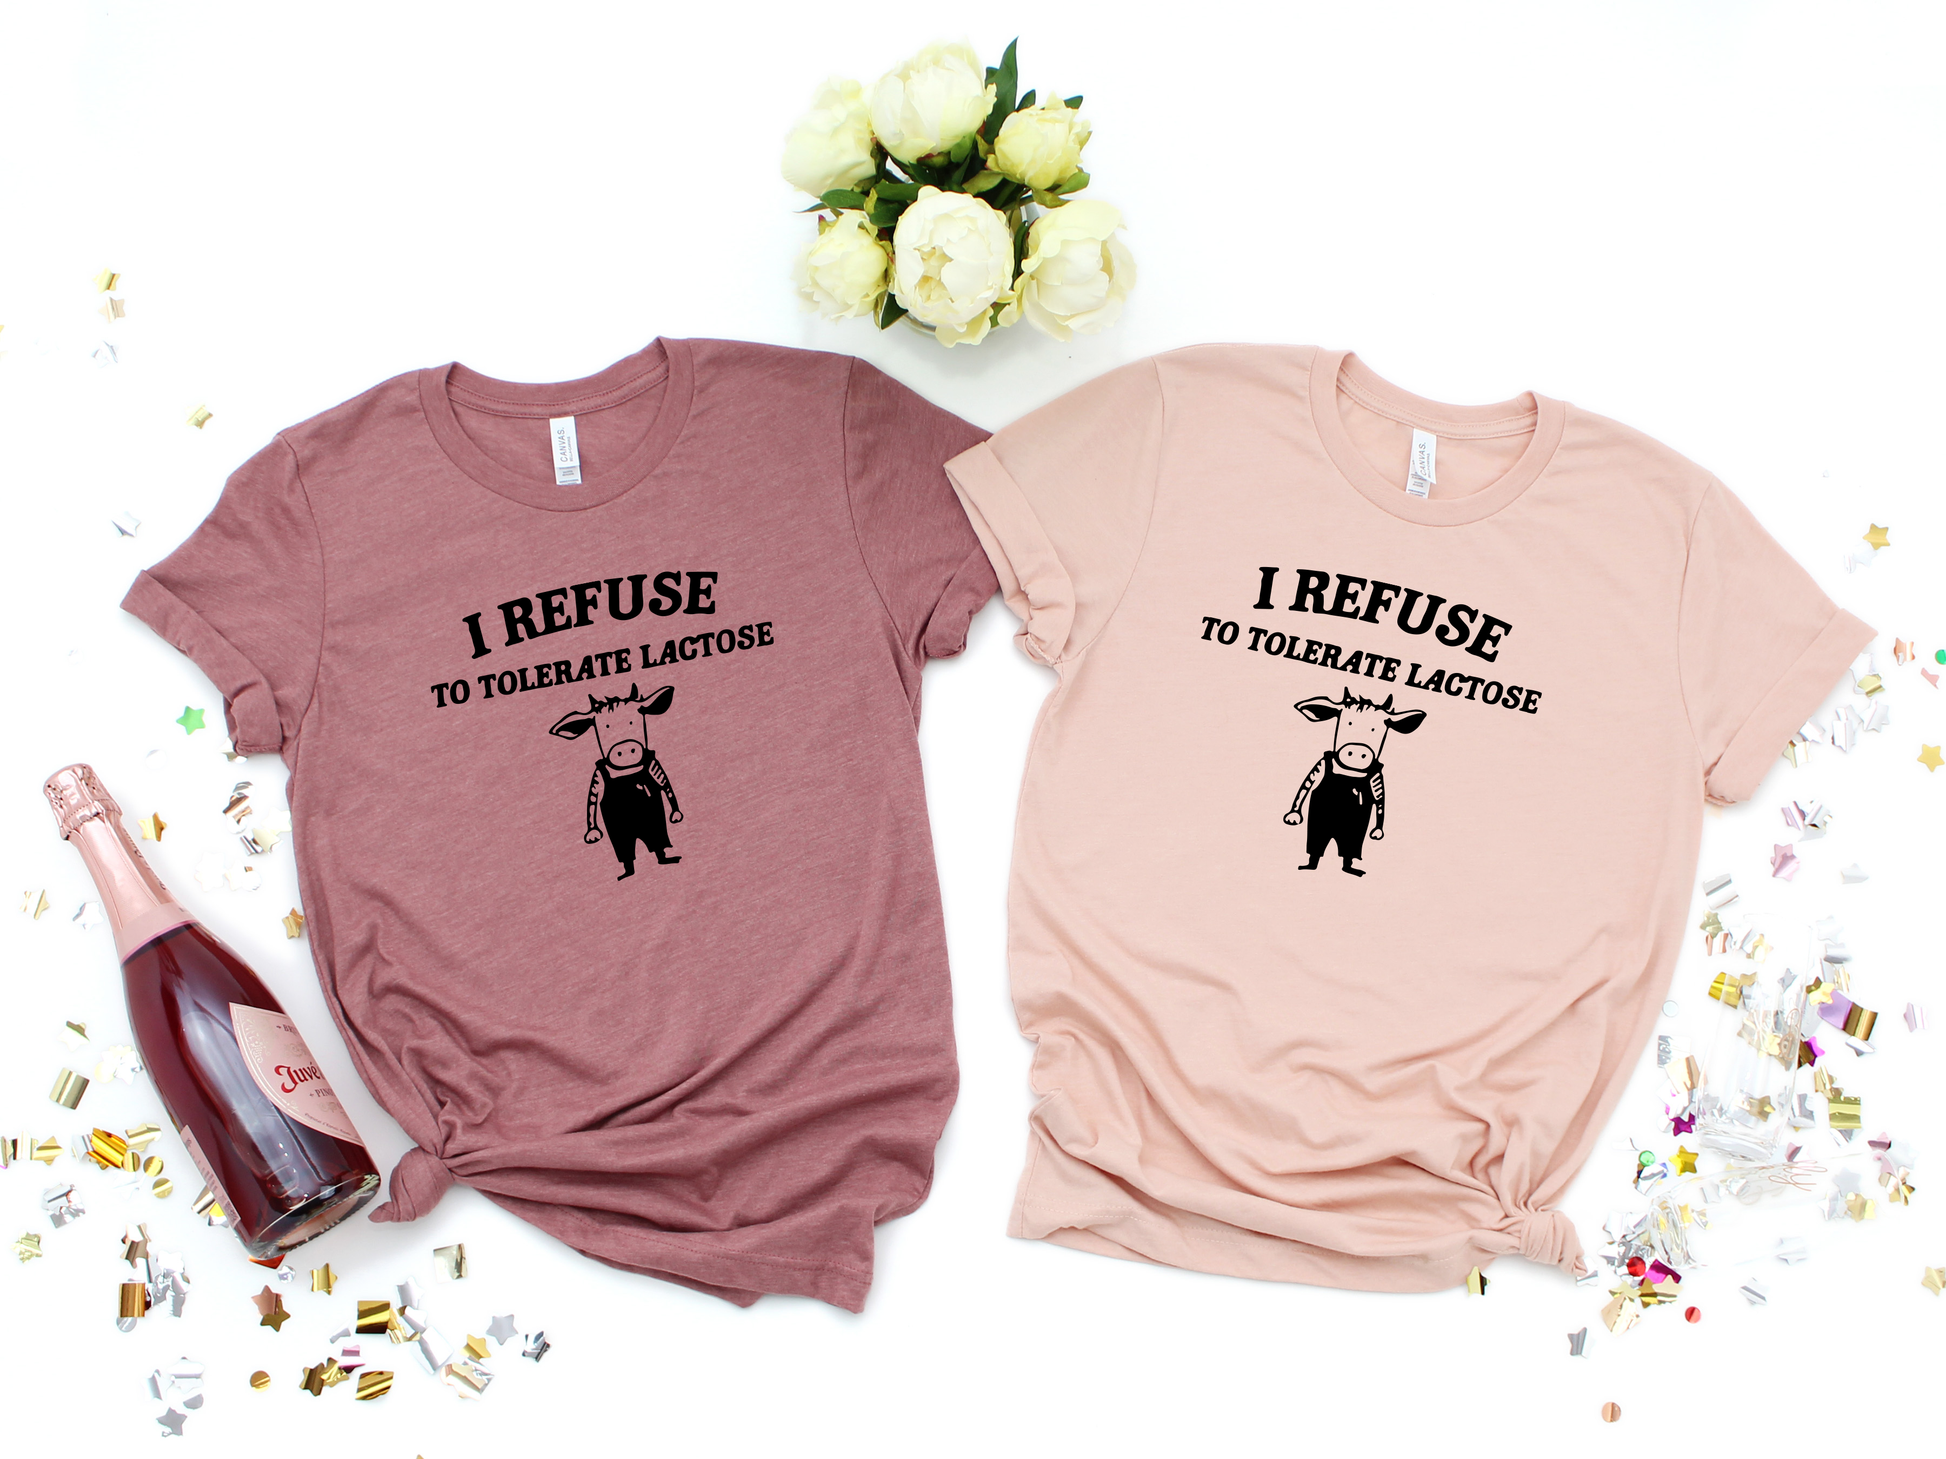 I Refuse To Tolerate Lactose Shirt: Show off your lactose-free pride with this fun tee.